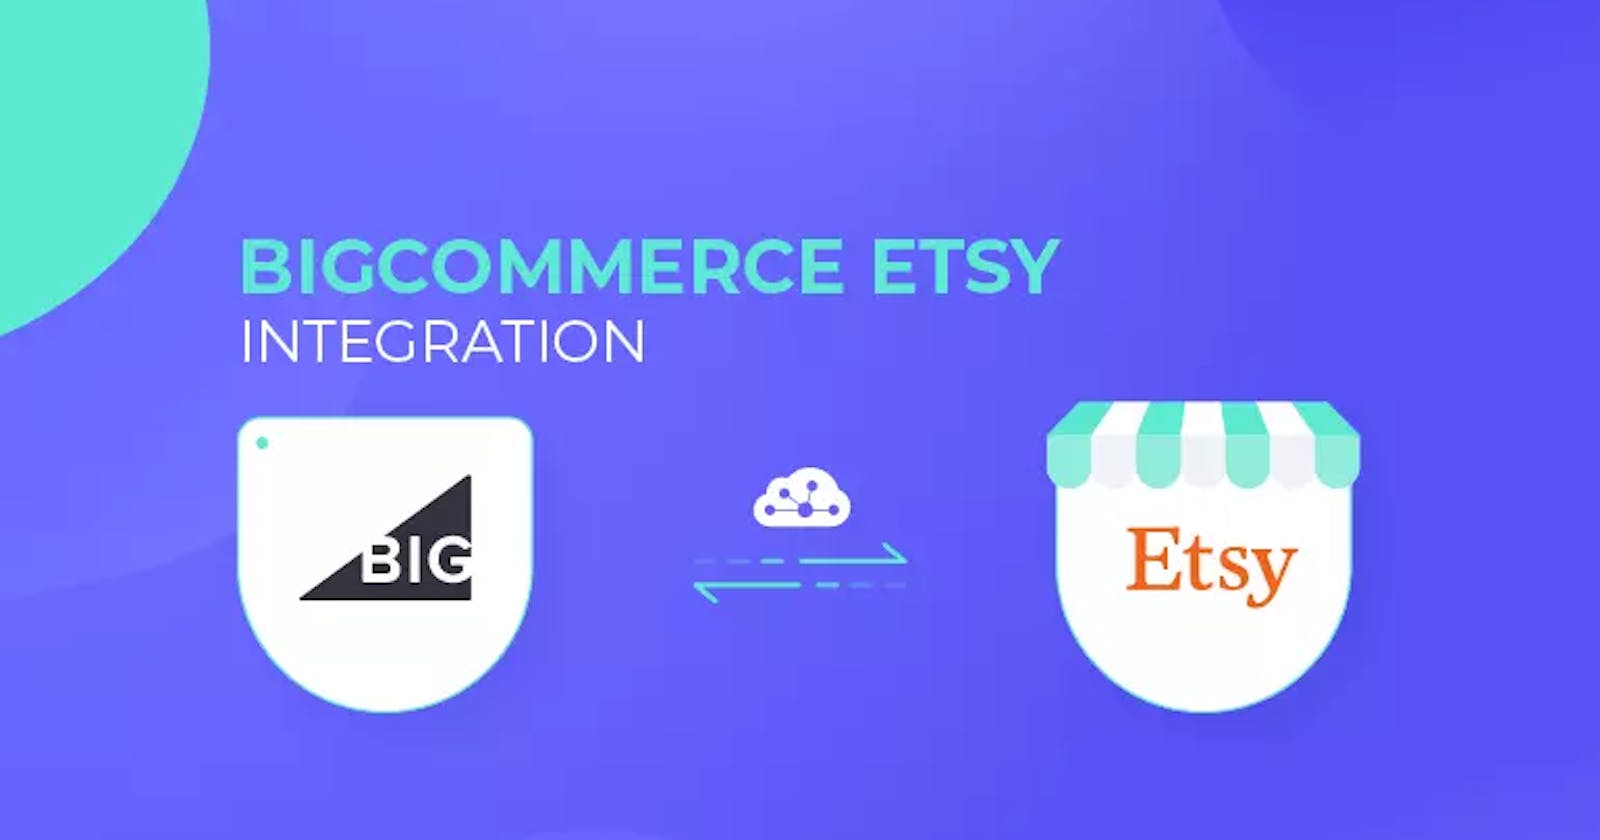 BigCommerce Etsy Integration: 6 Easy Steps to Set Up and Run